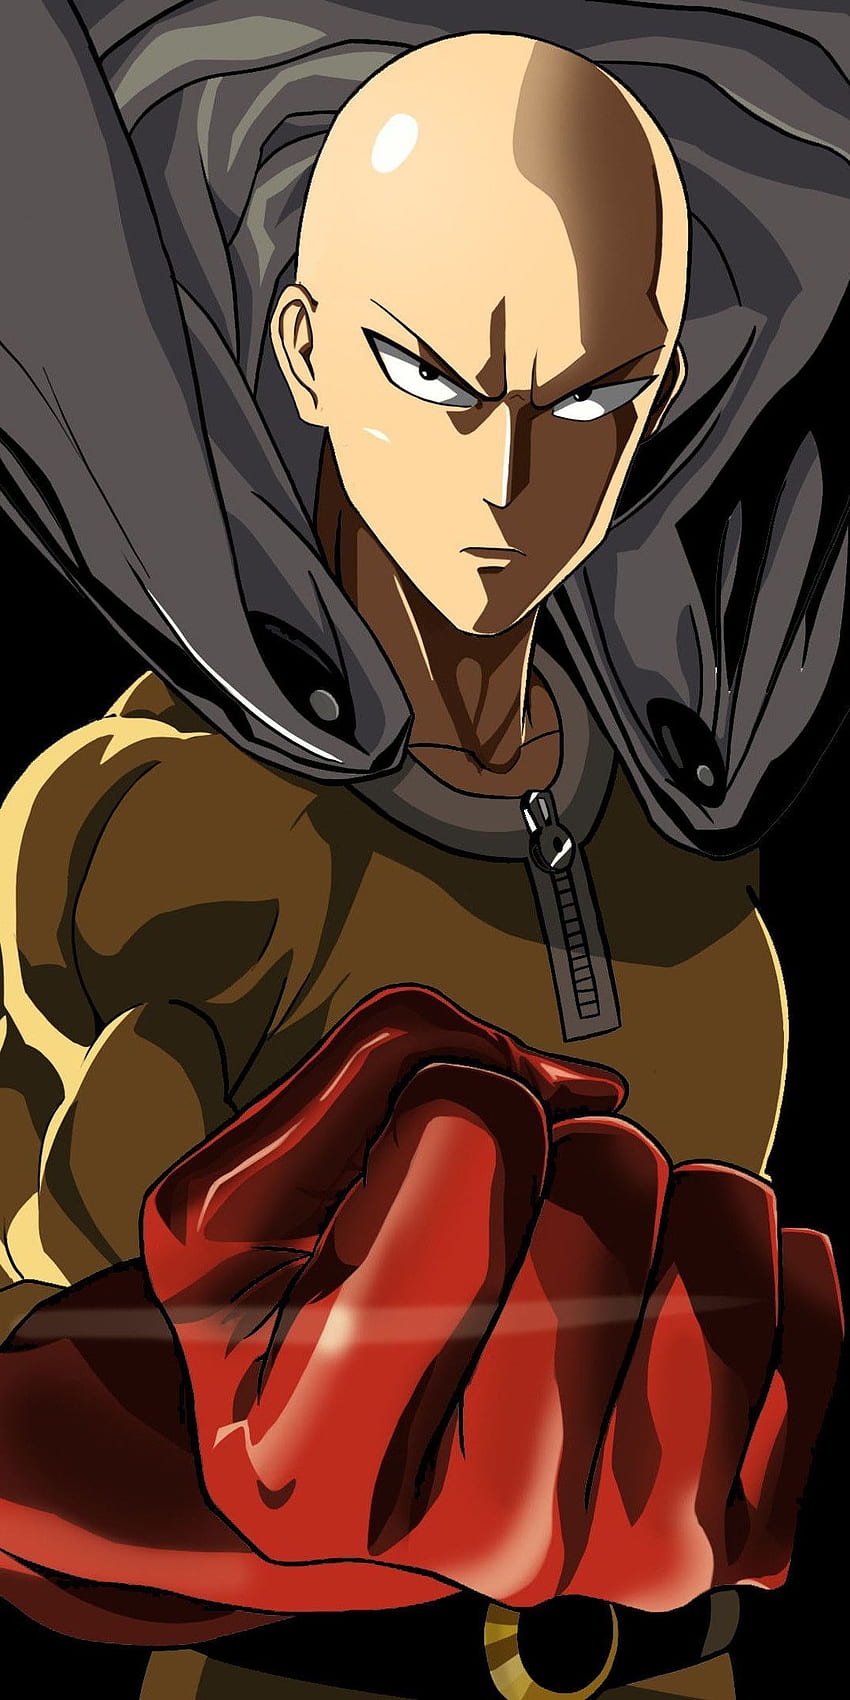 One Punch Man Android - iPhone Center 01 di tahun 2020. Anime one punch man, Manga one punch man, Saitama one punch man, One Punch Man King wallpaper ponsel HD